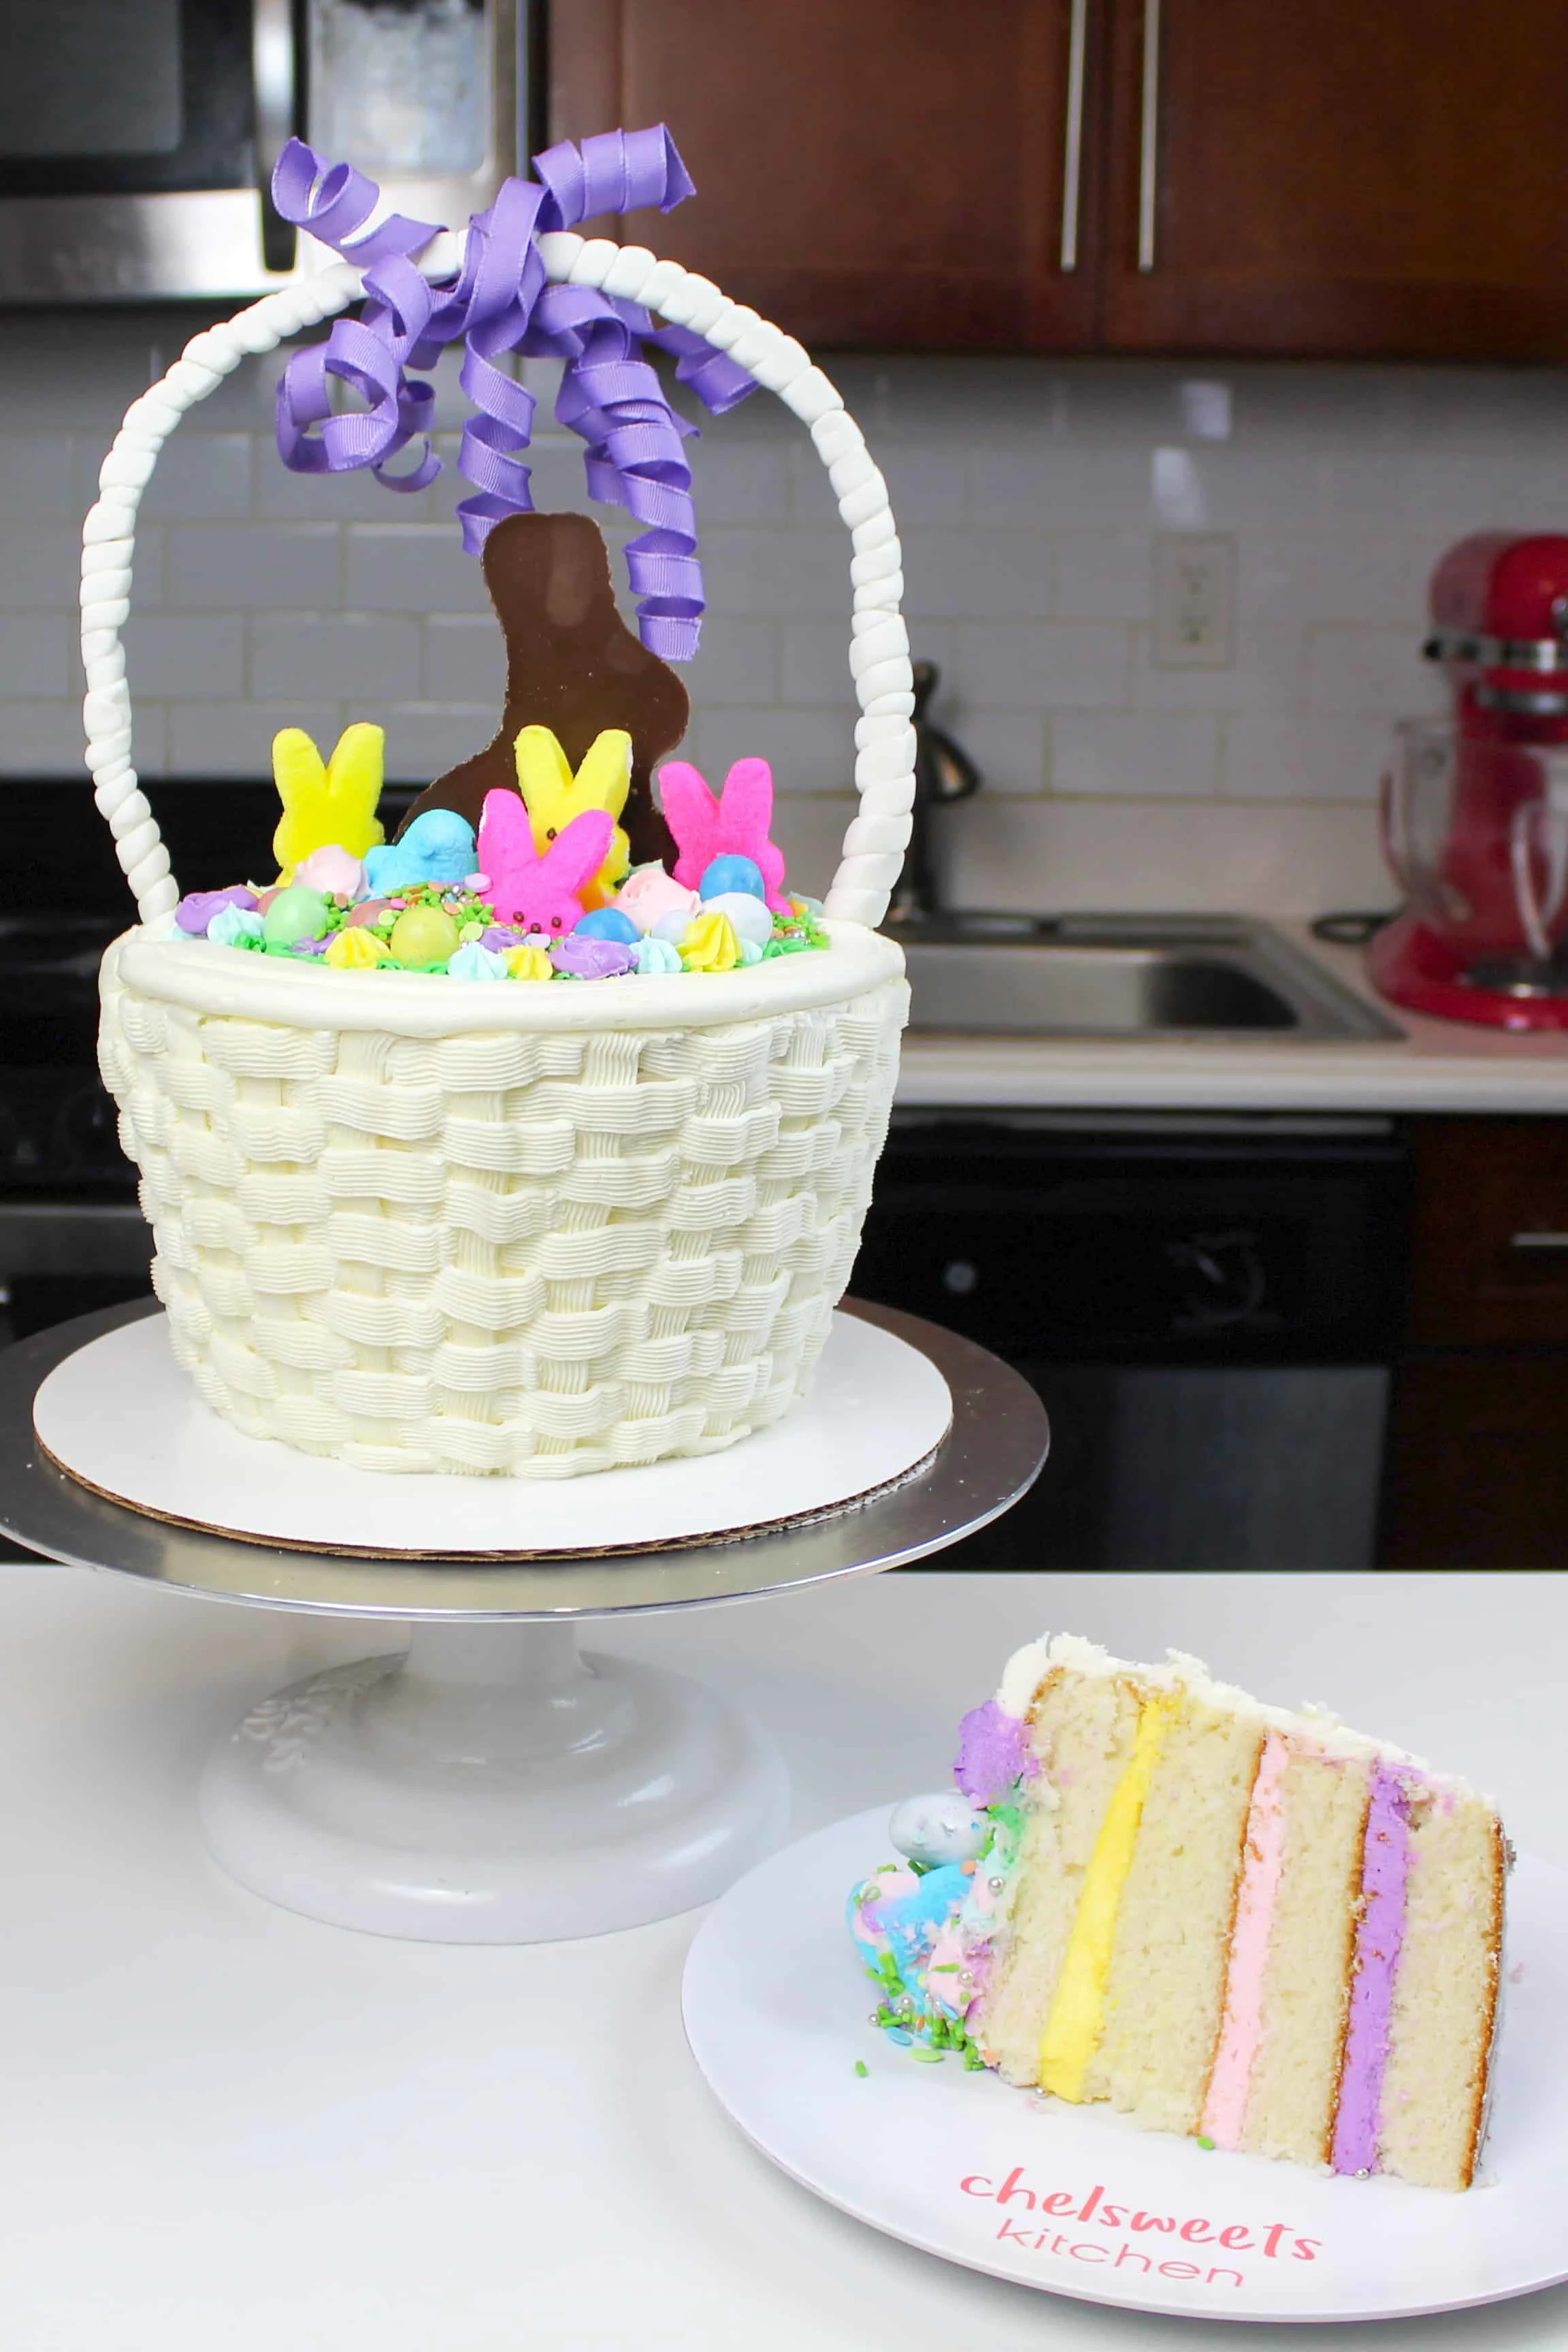 How to Pipe a Buttercream Basketweave Cake Design | Wilton - YouTube